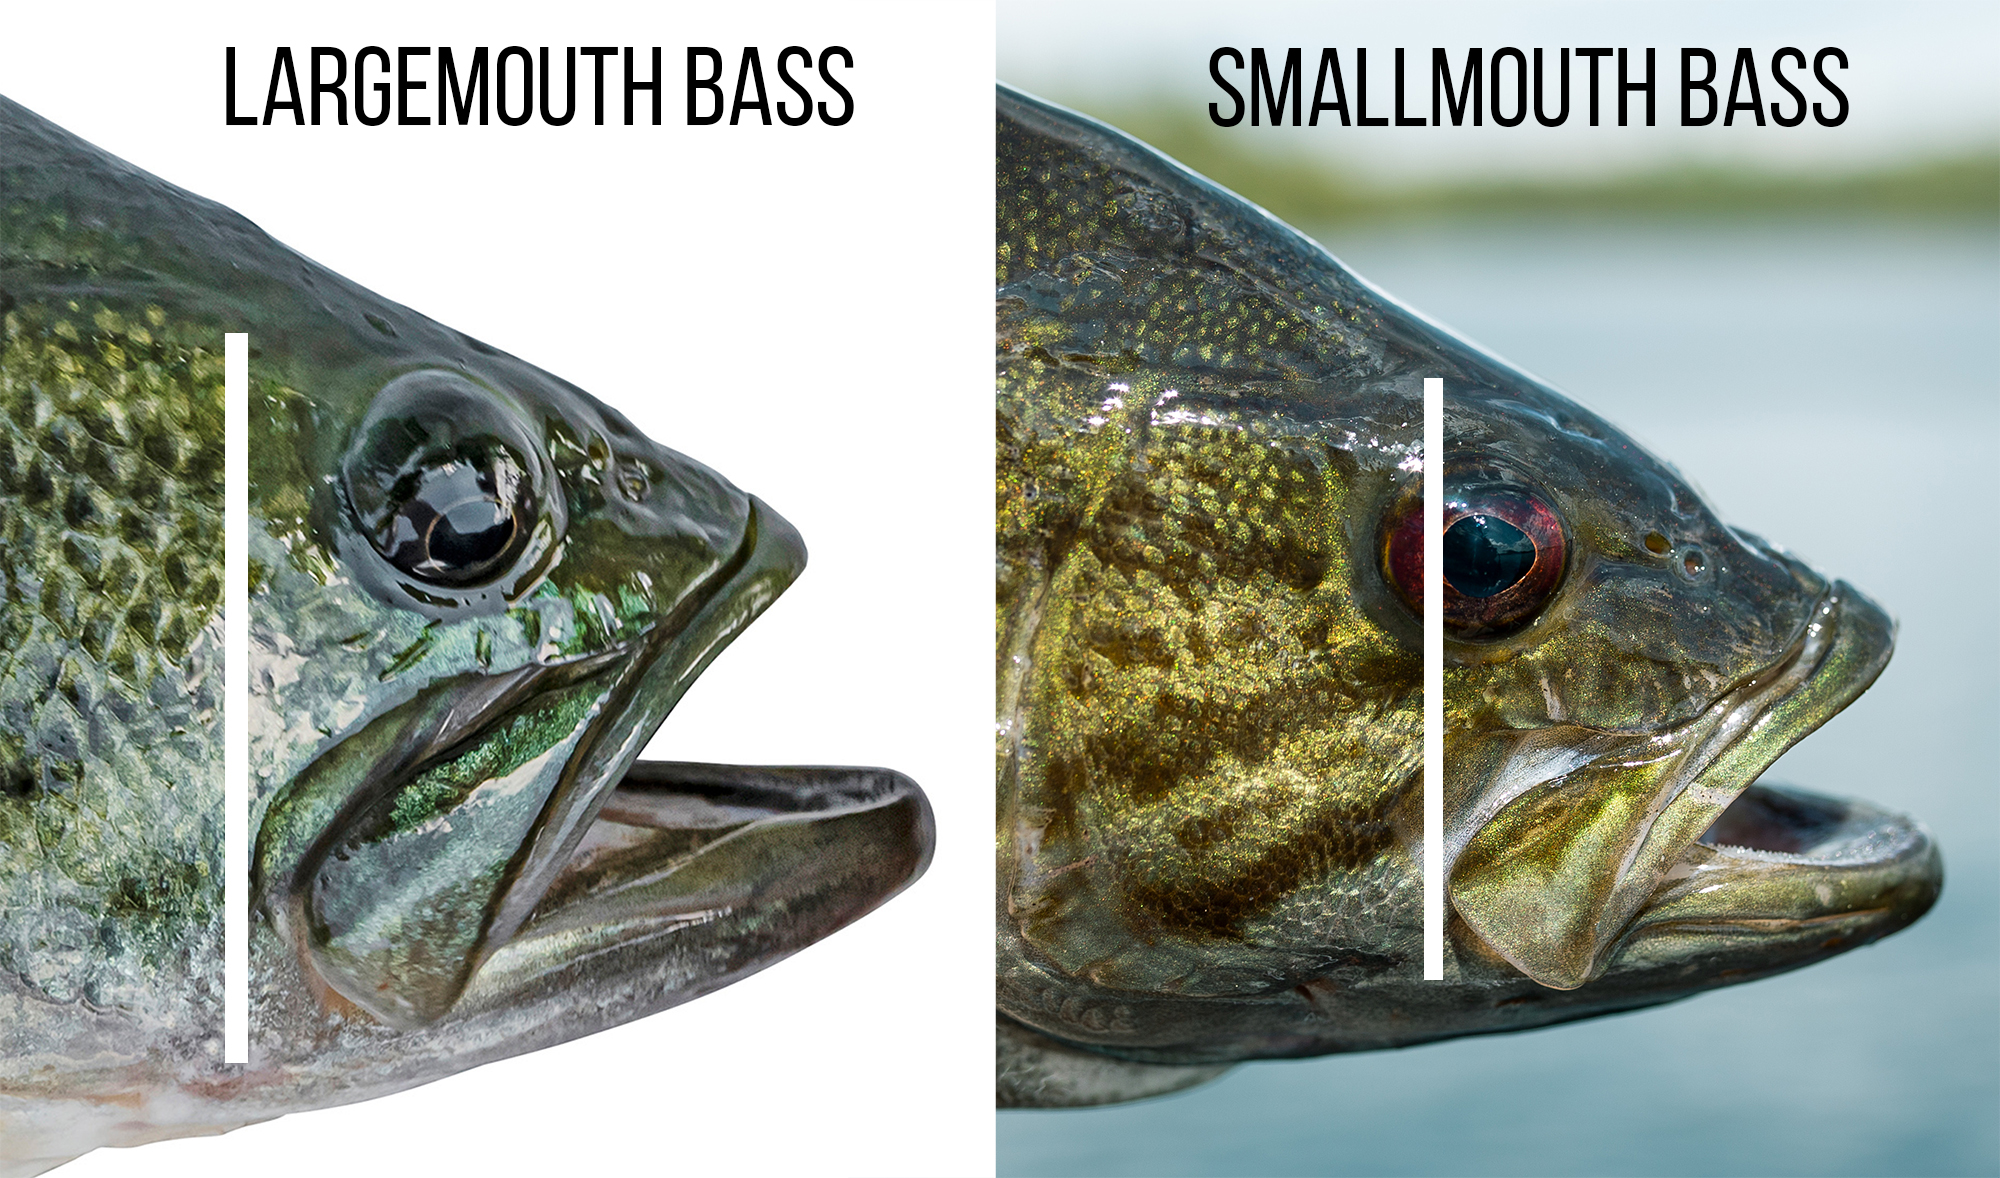 A largemouth bass' mouth extends past its eye, whereas a smallmouth's is closer in line to its eyeball.